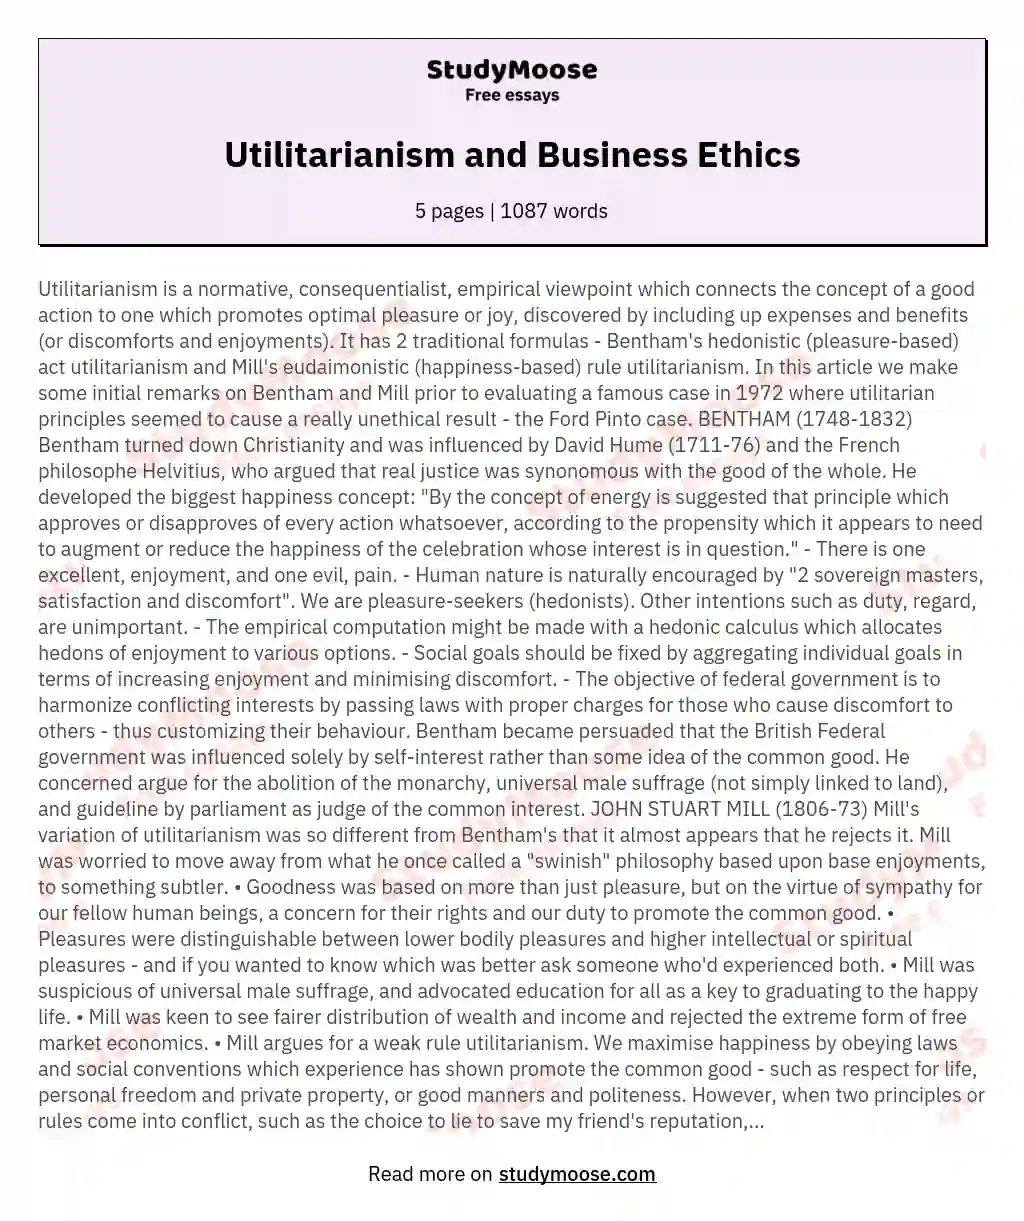 Utilitarianism and Business Ethics